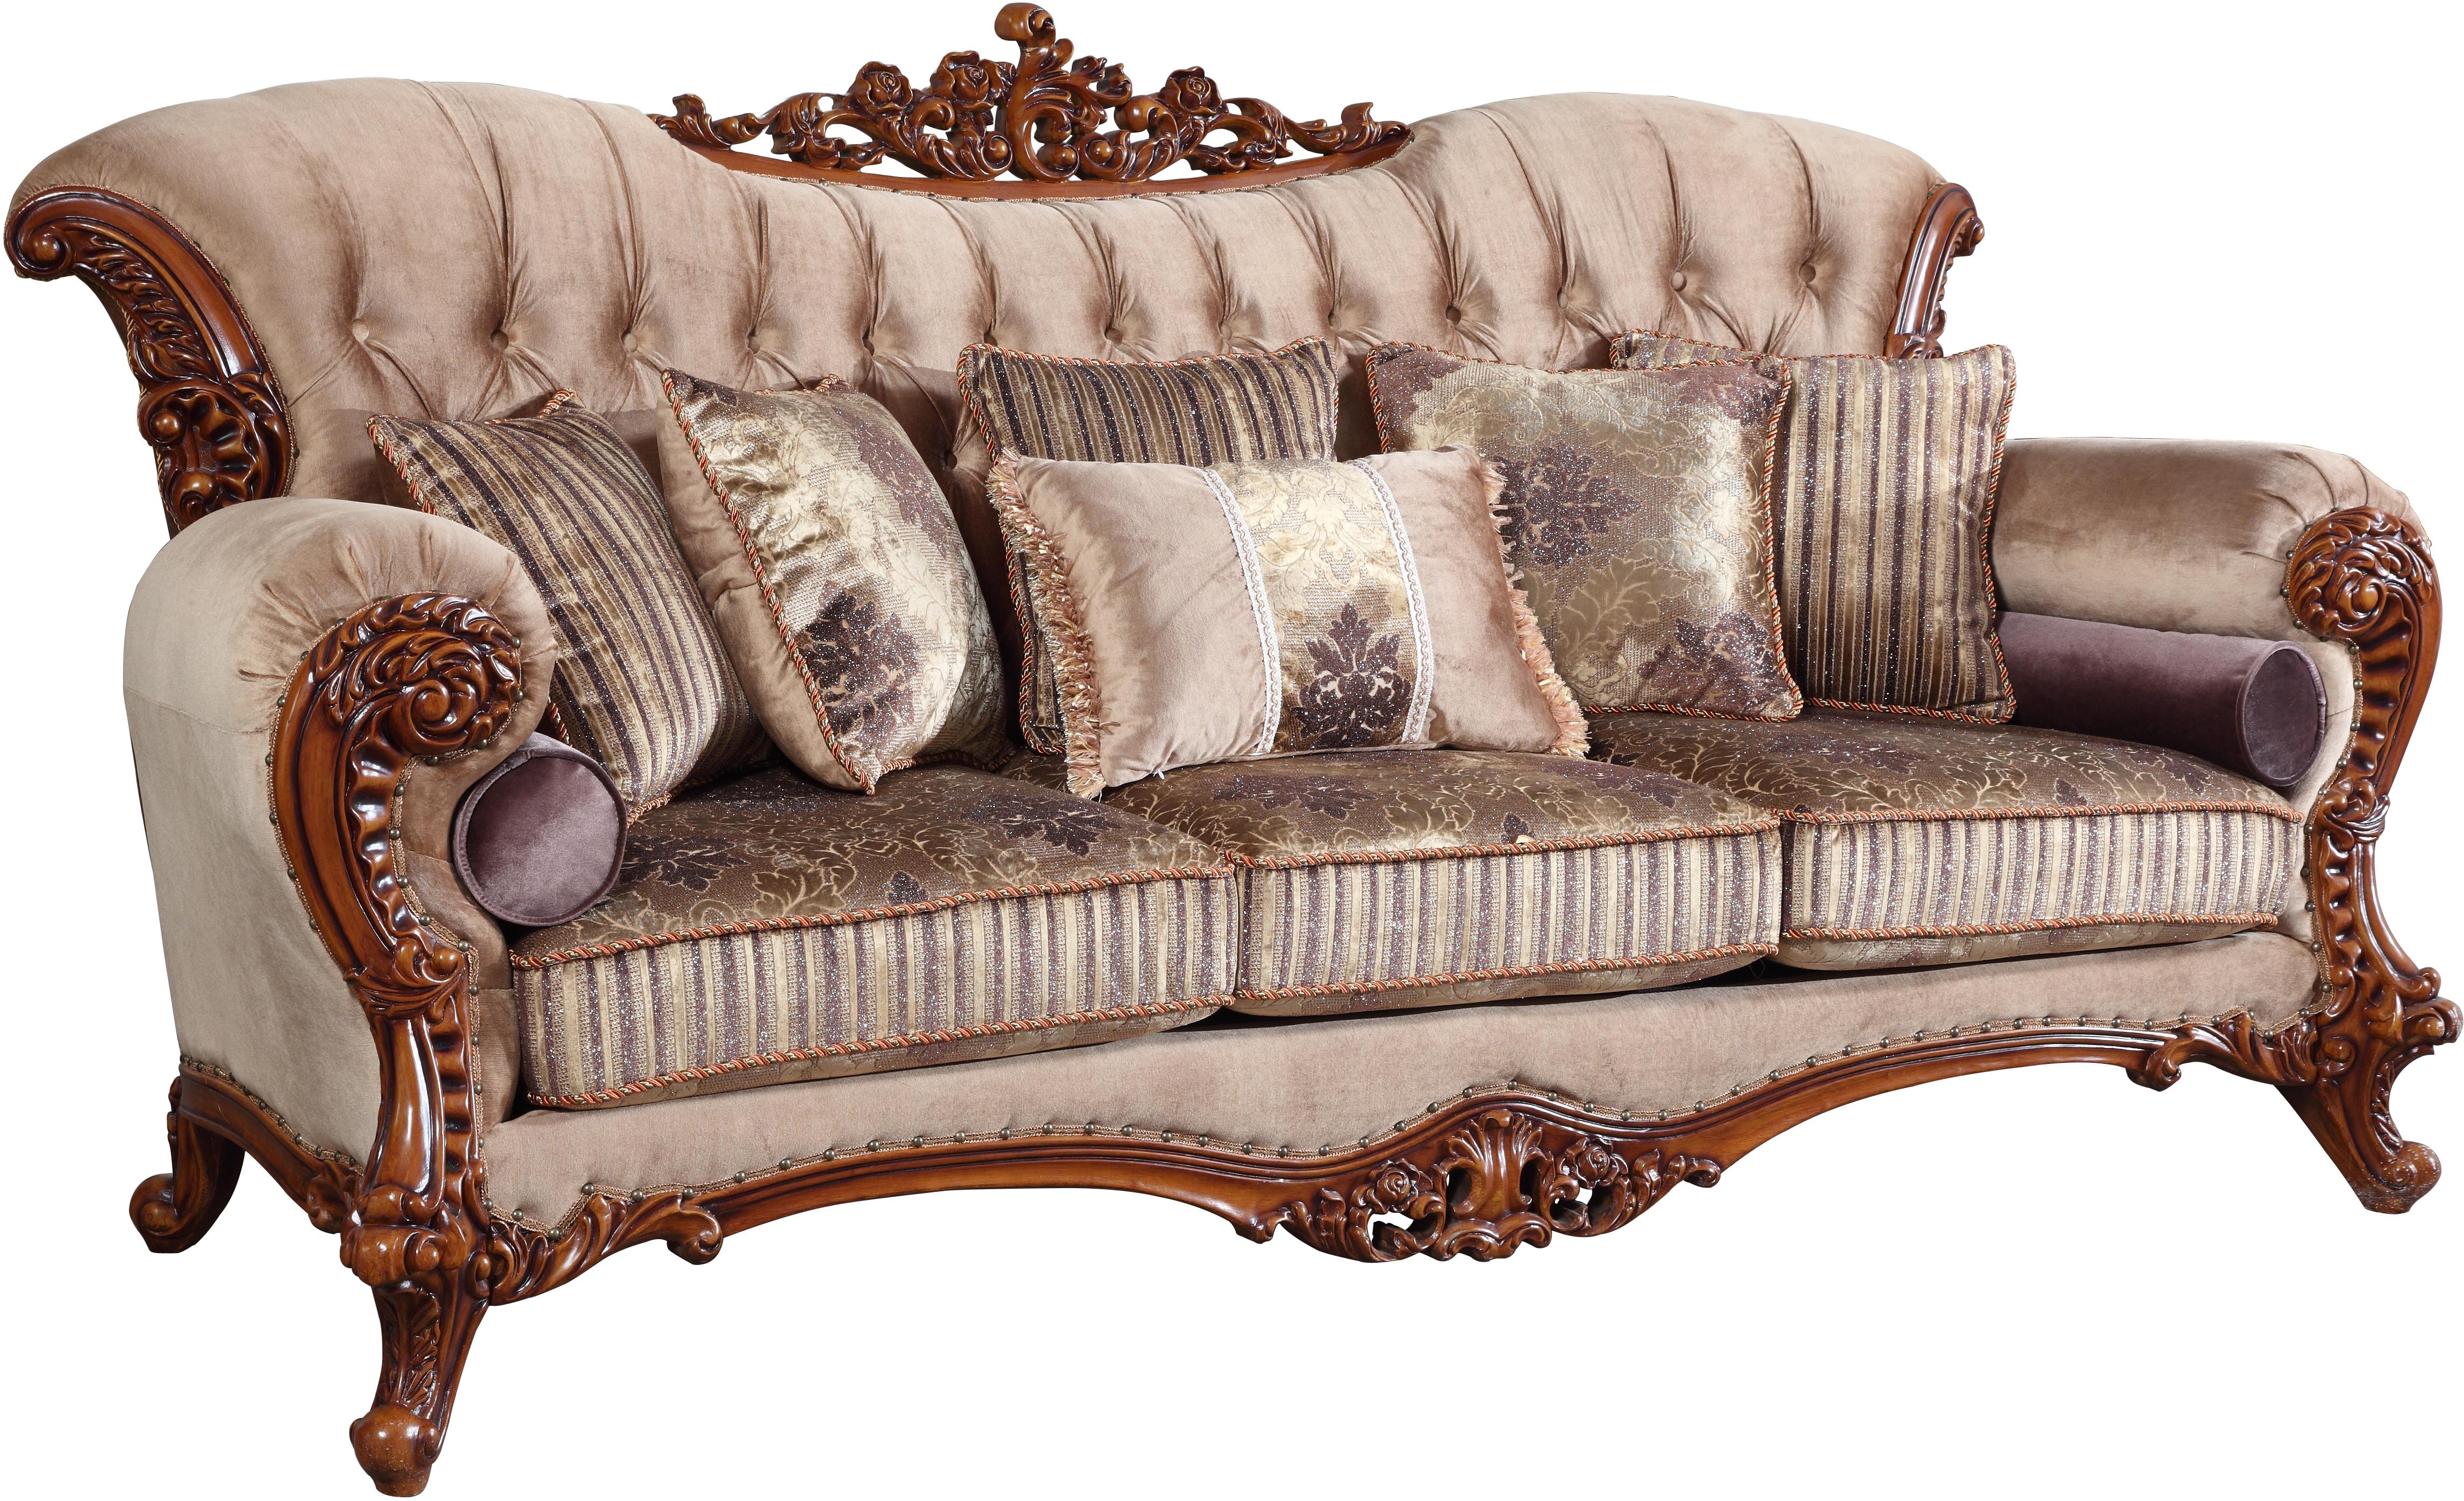 

    
Meridian 605 Bordeaux Beige Living Room Sofa Carved Wood Traditional Classic
